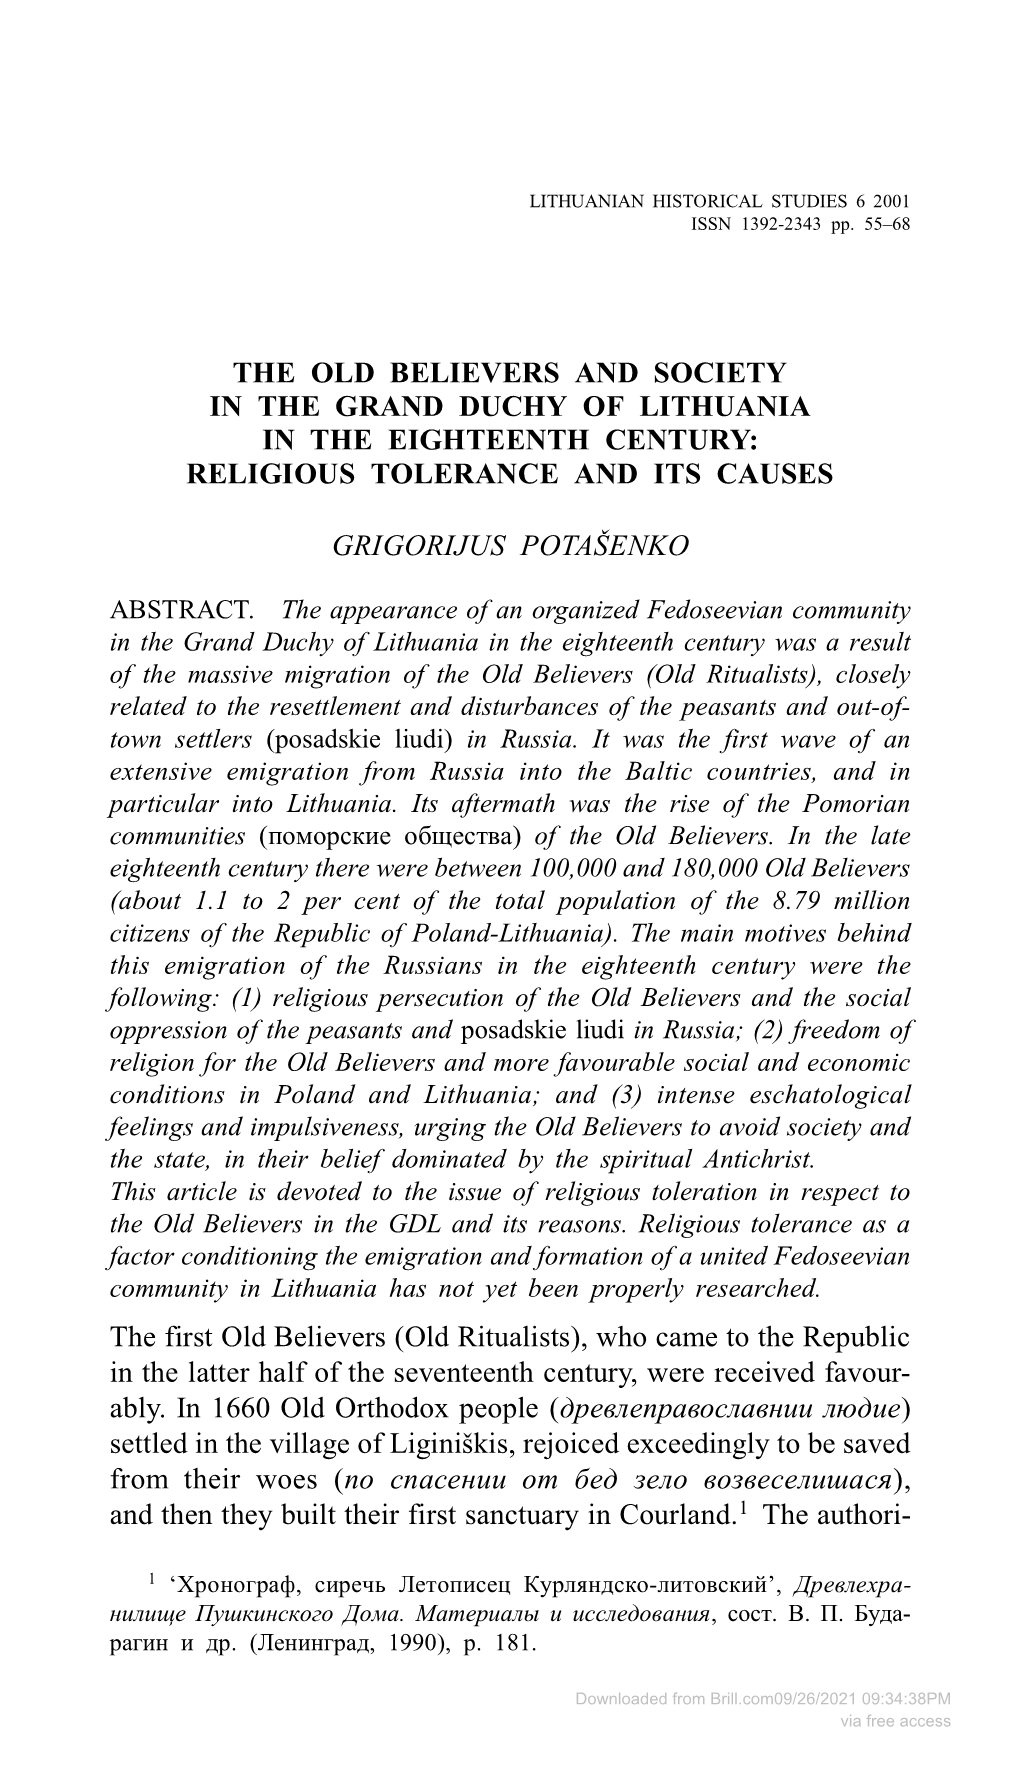 The Old Believers and Society in the Grand Duchy of Lithuania in the Eighteenth Century: Religious Tolerance and Its Causes